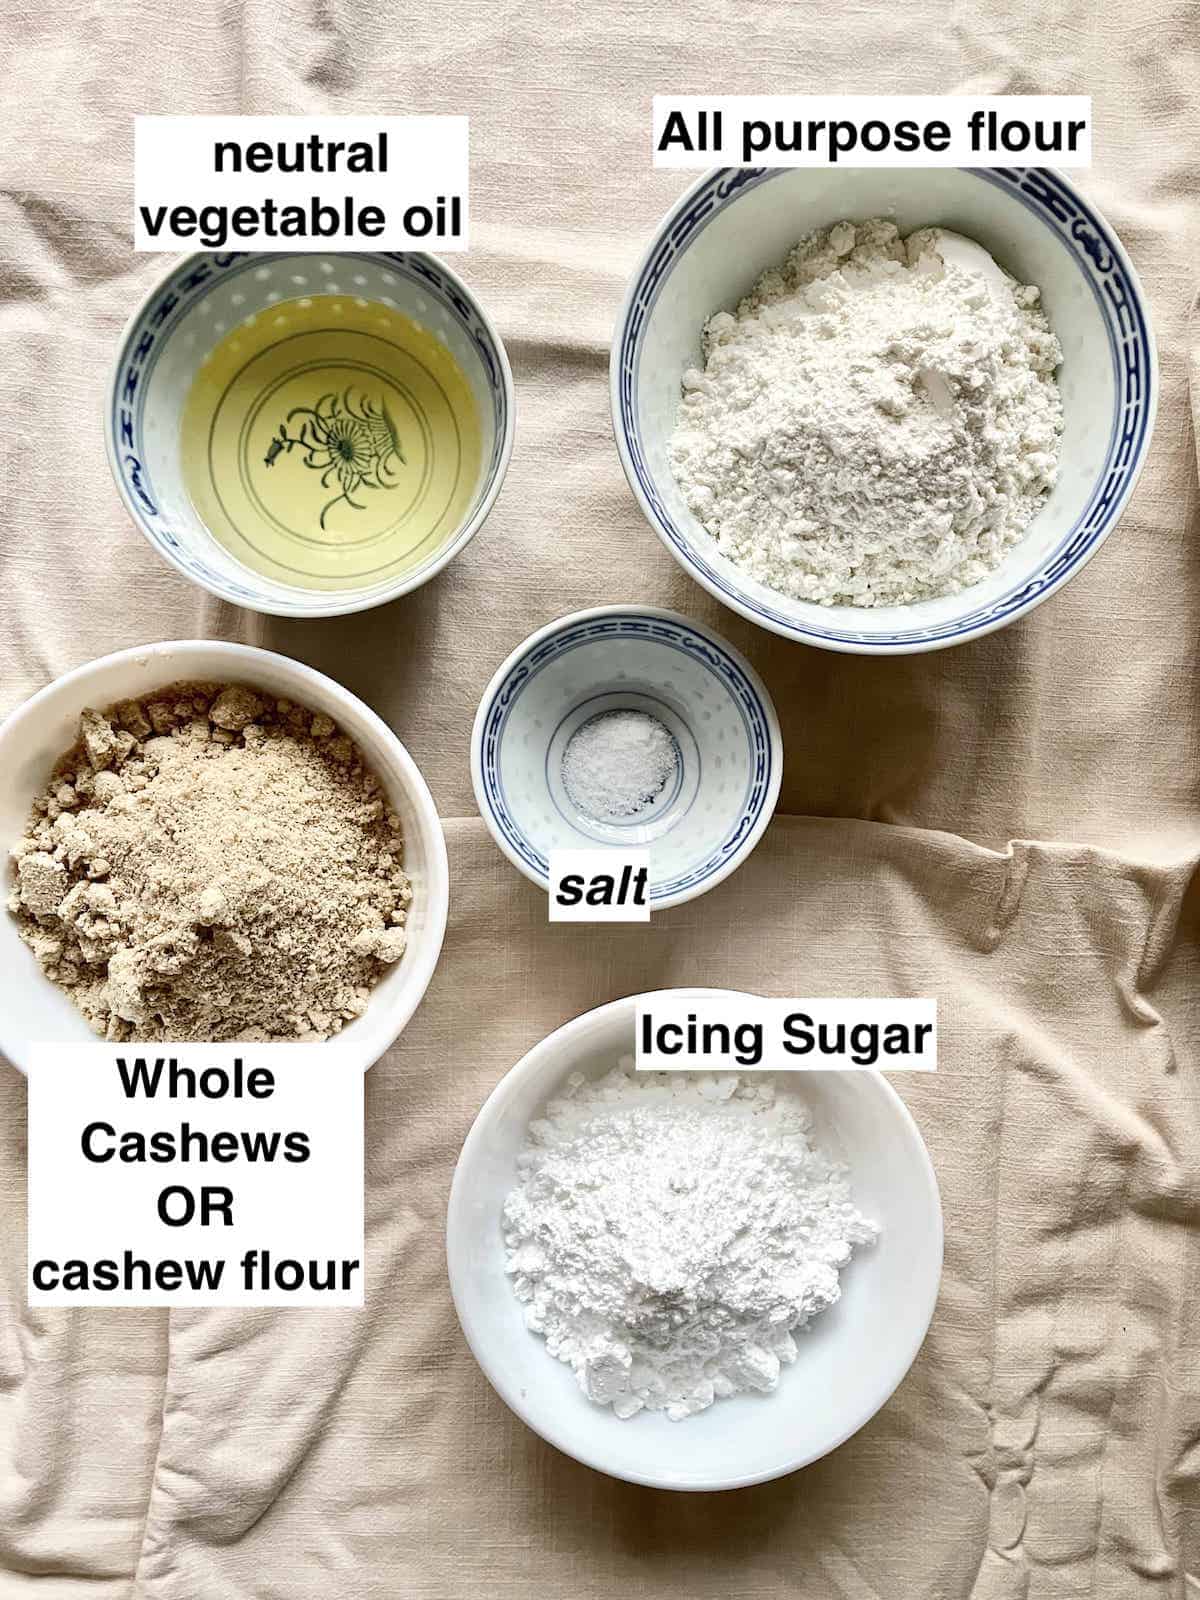 5 ingredients for Cashew Cookies on a linen cloth.